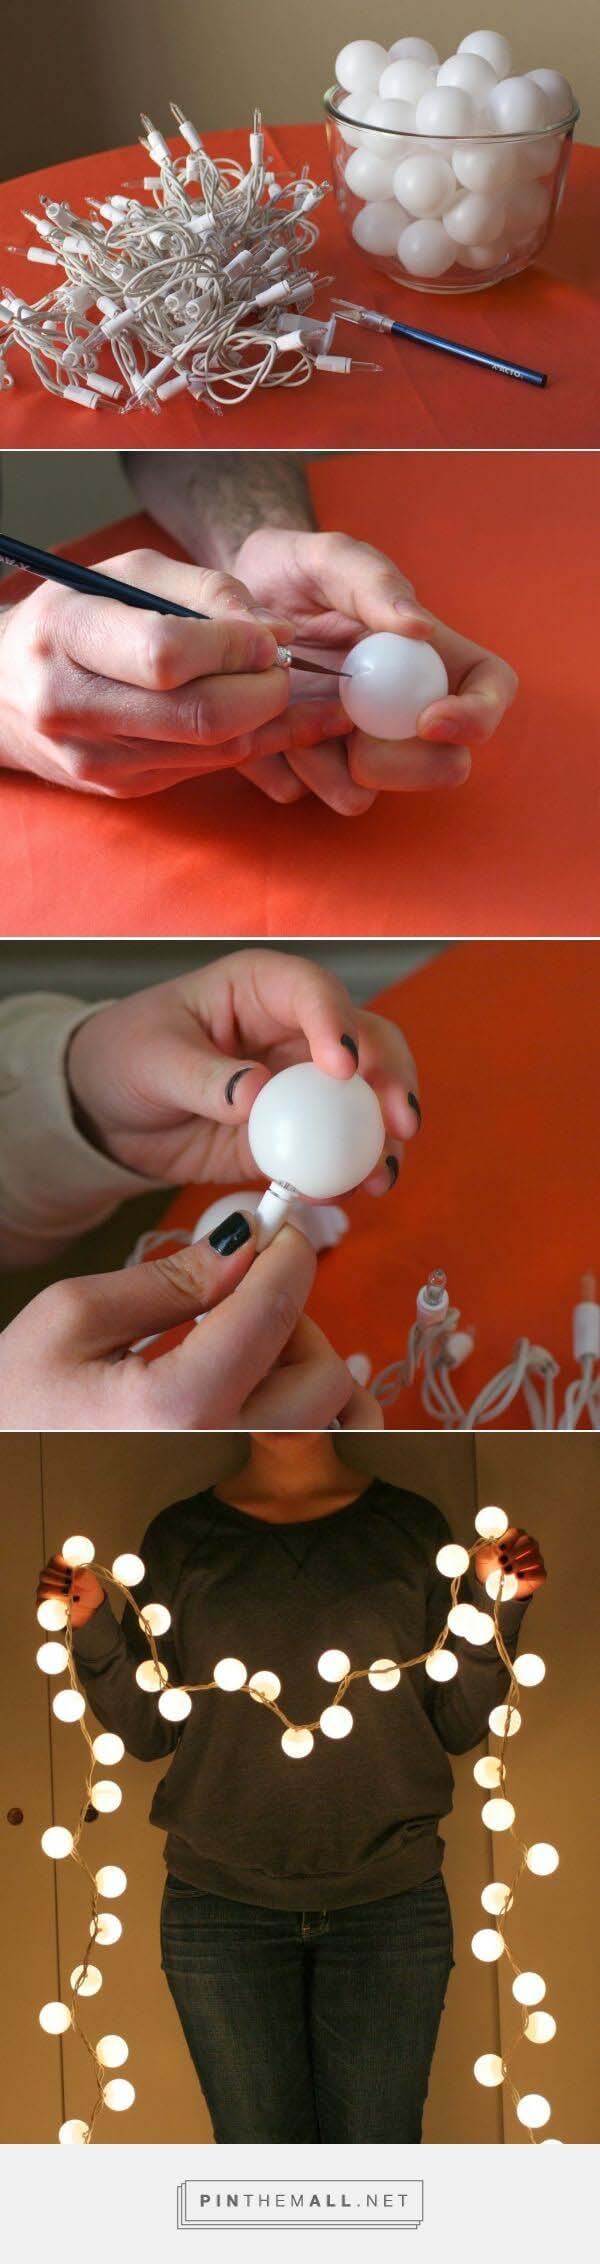 Make Your Own Ping-Pong Ball Party Lights #diy #weekendproject #decorhomeideas